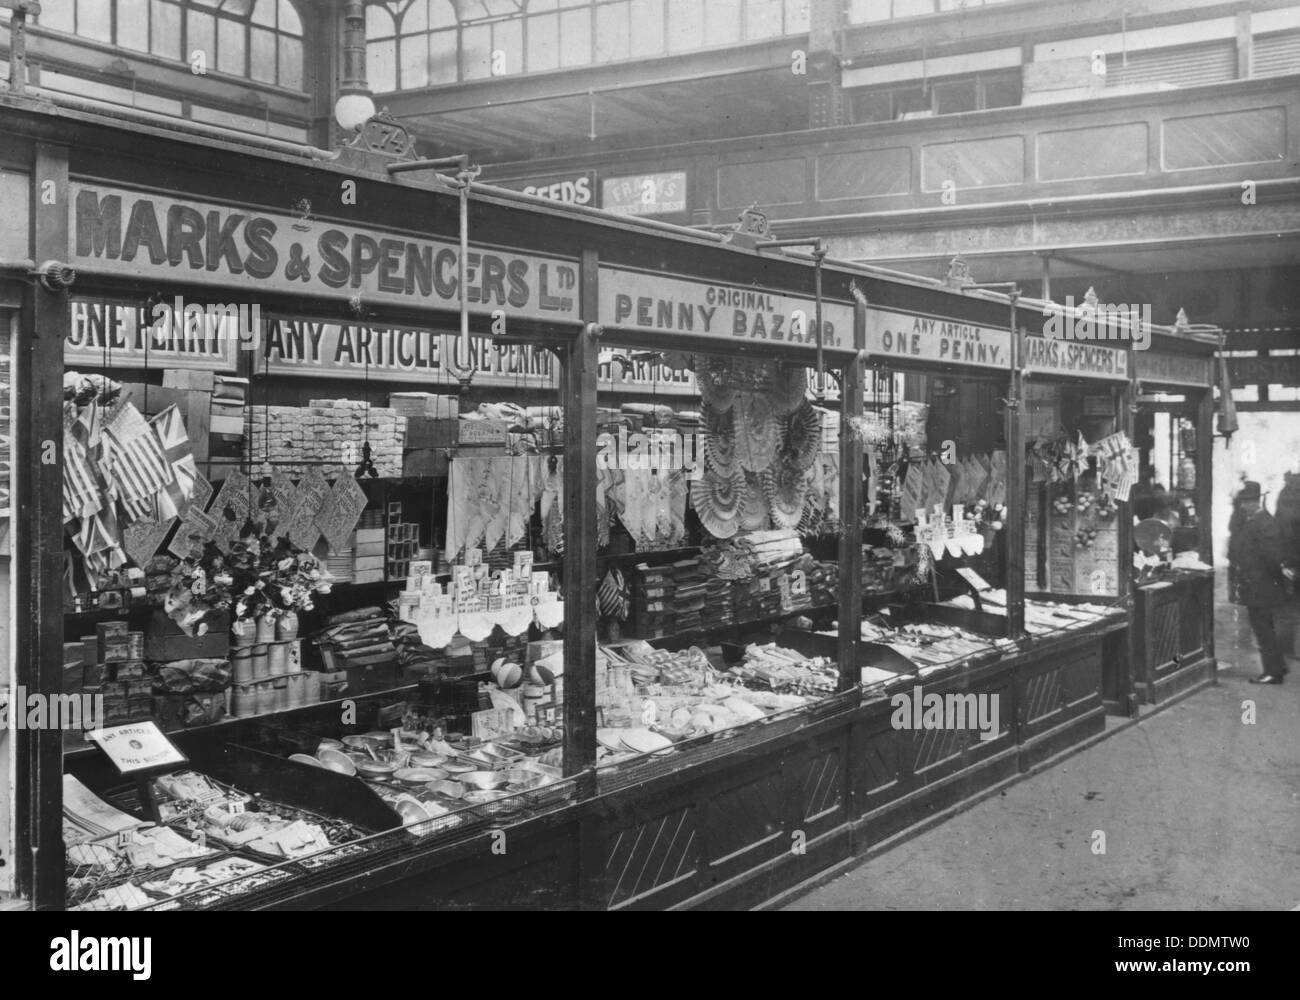 Marks & Spencer's stall in the covered market, Cardiff, 1901. Artist: Unknown Stock Photo